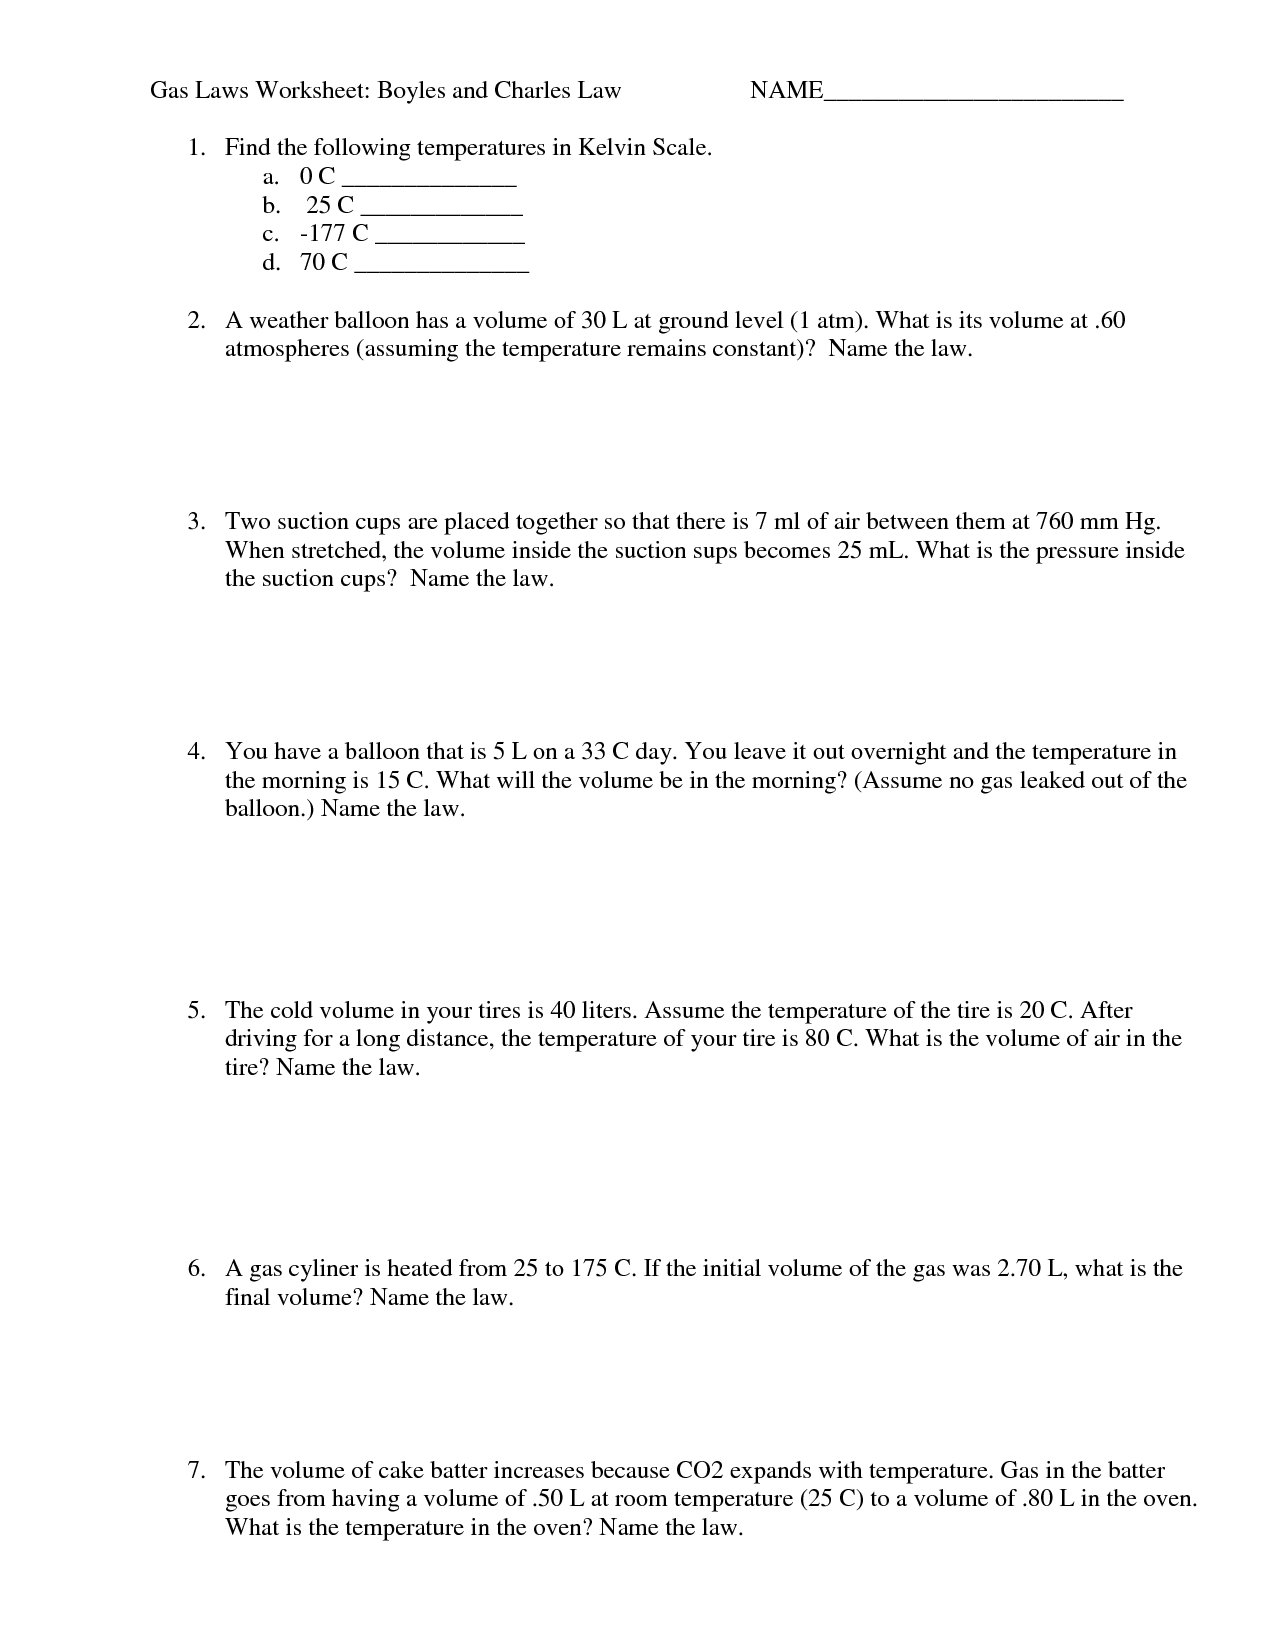 Charles Law and Boyles Law Worksheet Image